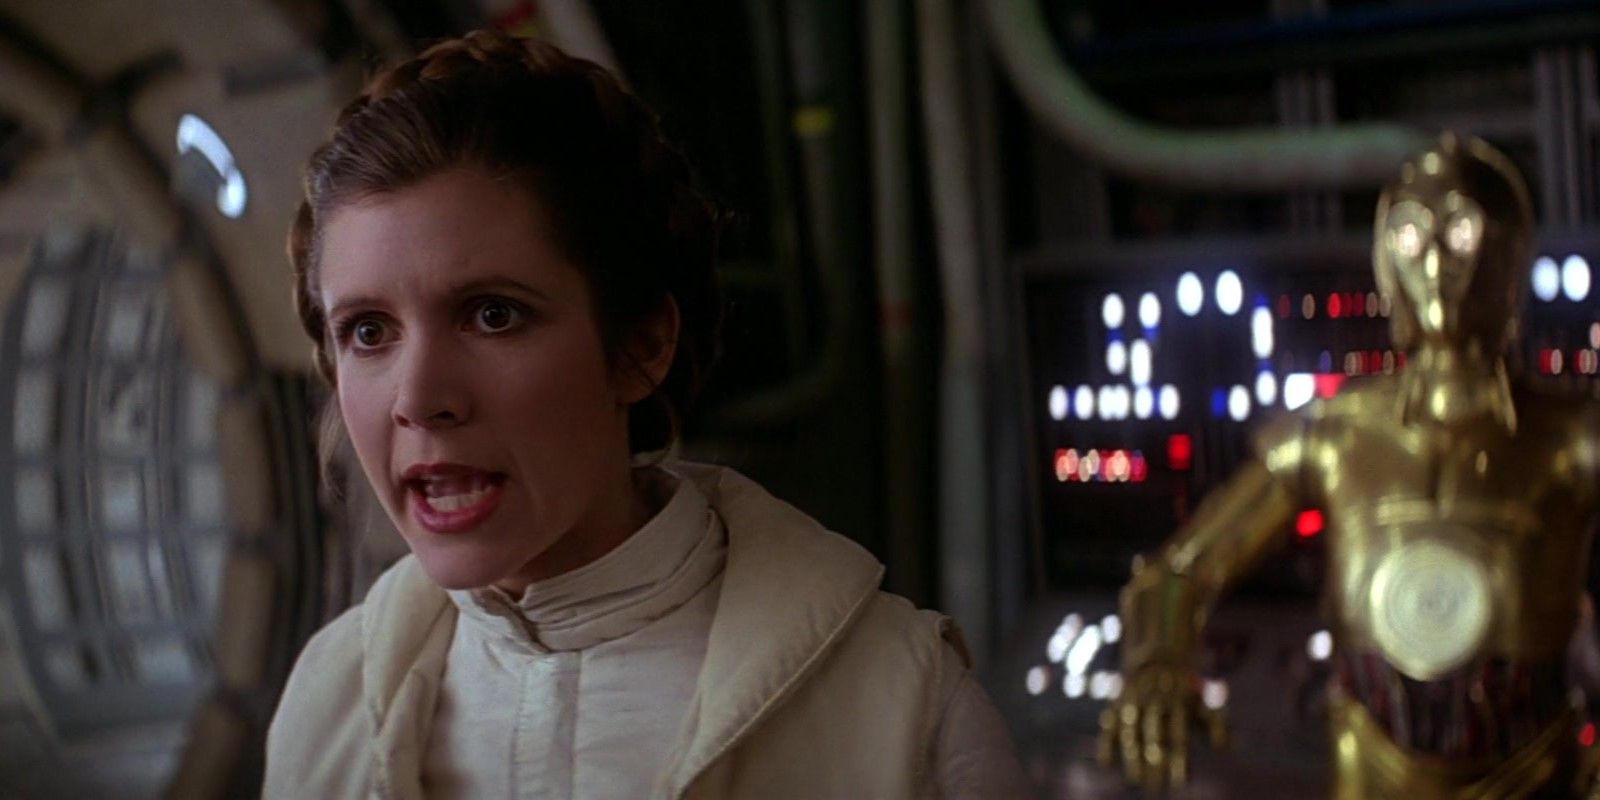 Leia Organa (Carrie Fisher) yelling offscreen with C3-PO standing in the background while on the Millennium Falcon in Star Wars: Episode V - The Empire Strikes Back